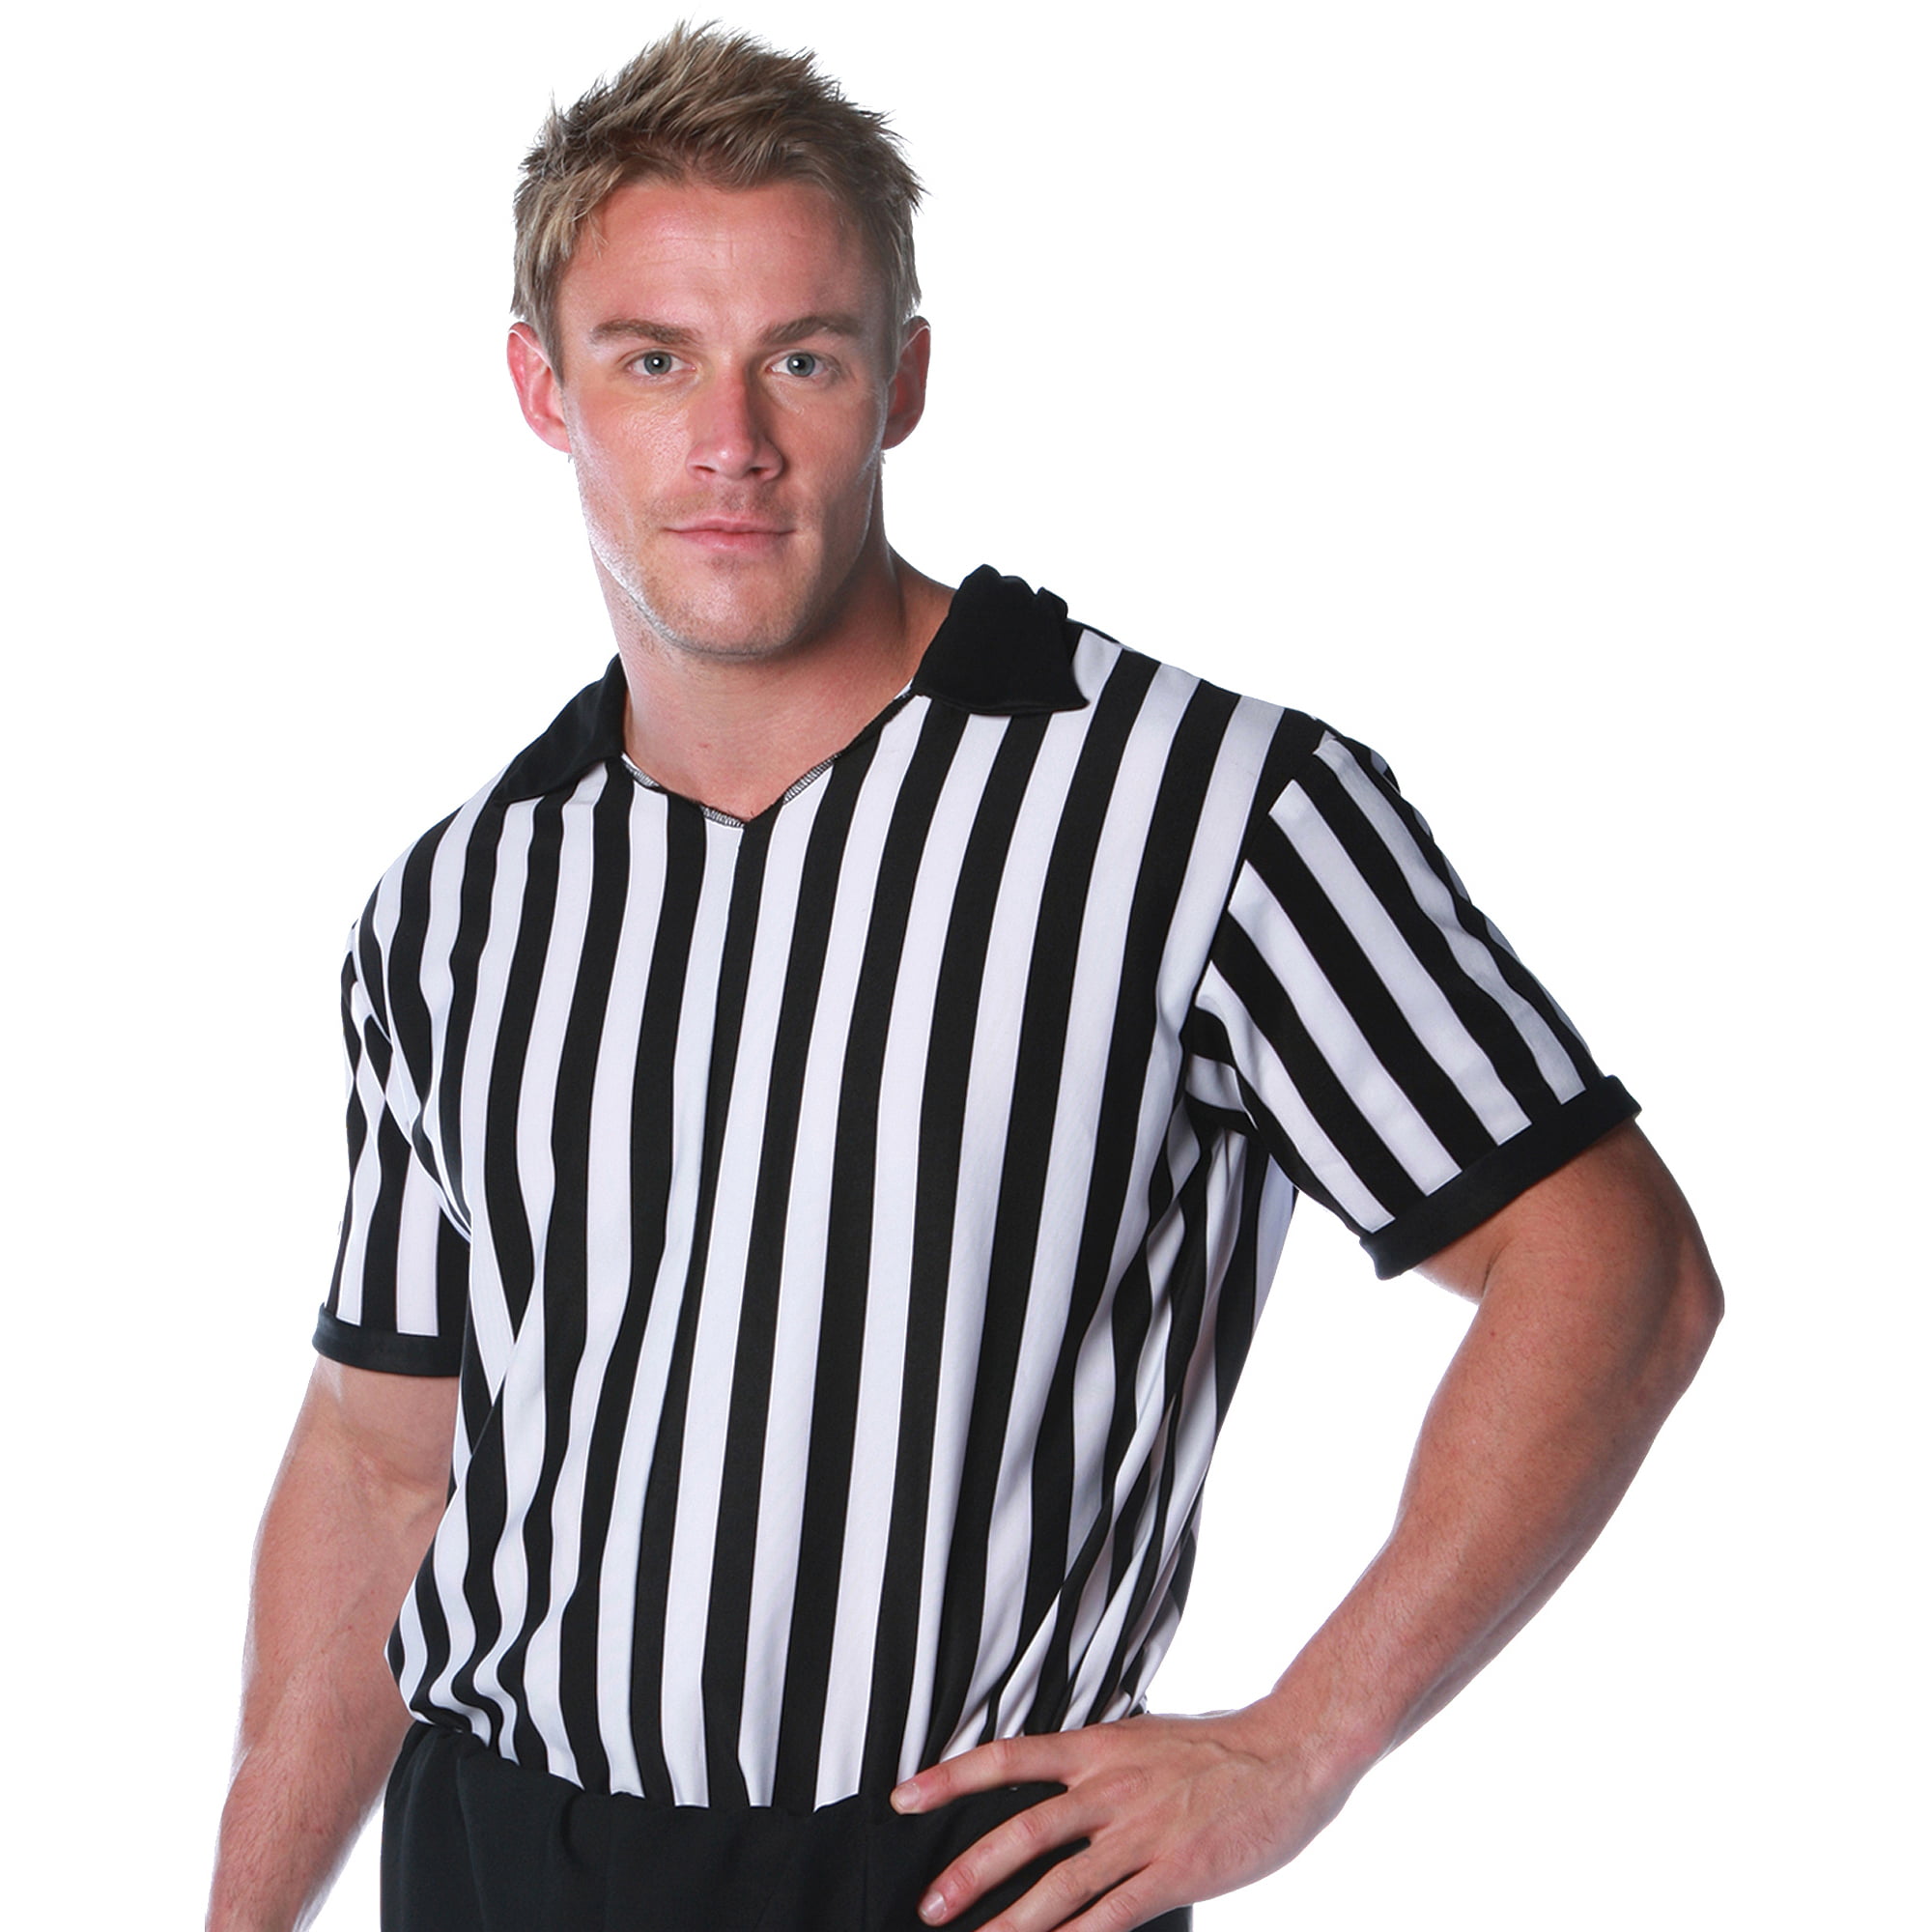 Referee Adult Black and White Costume Shirt and Hat Standard Size Adult